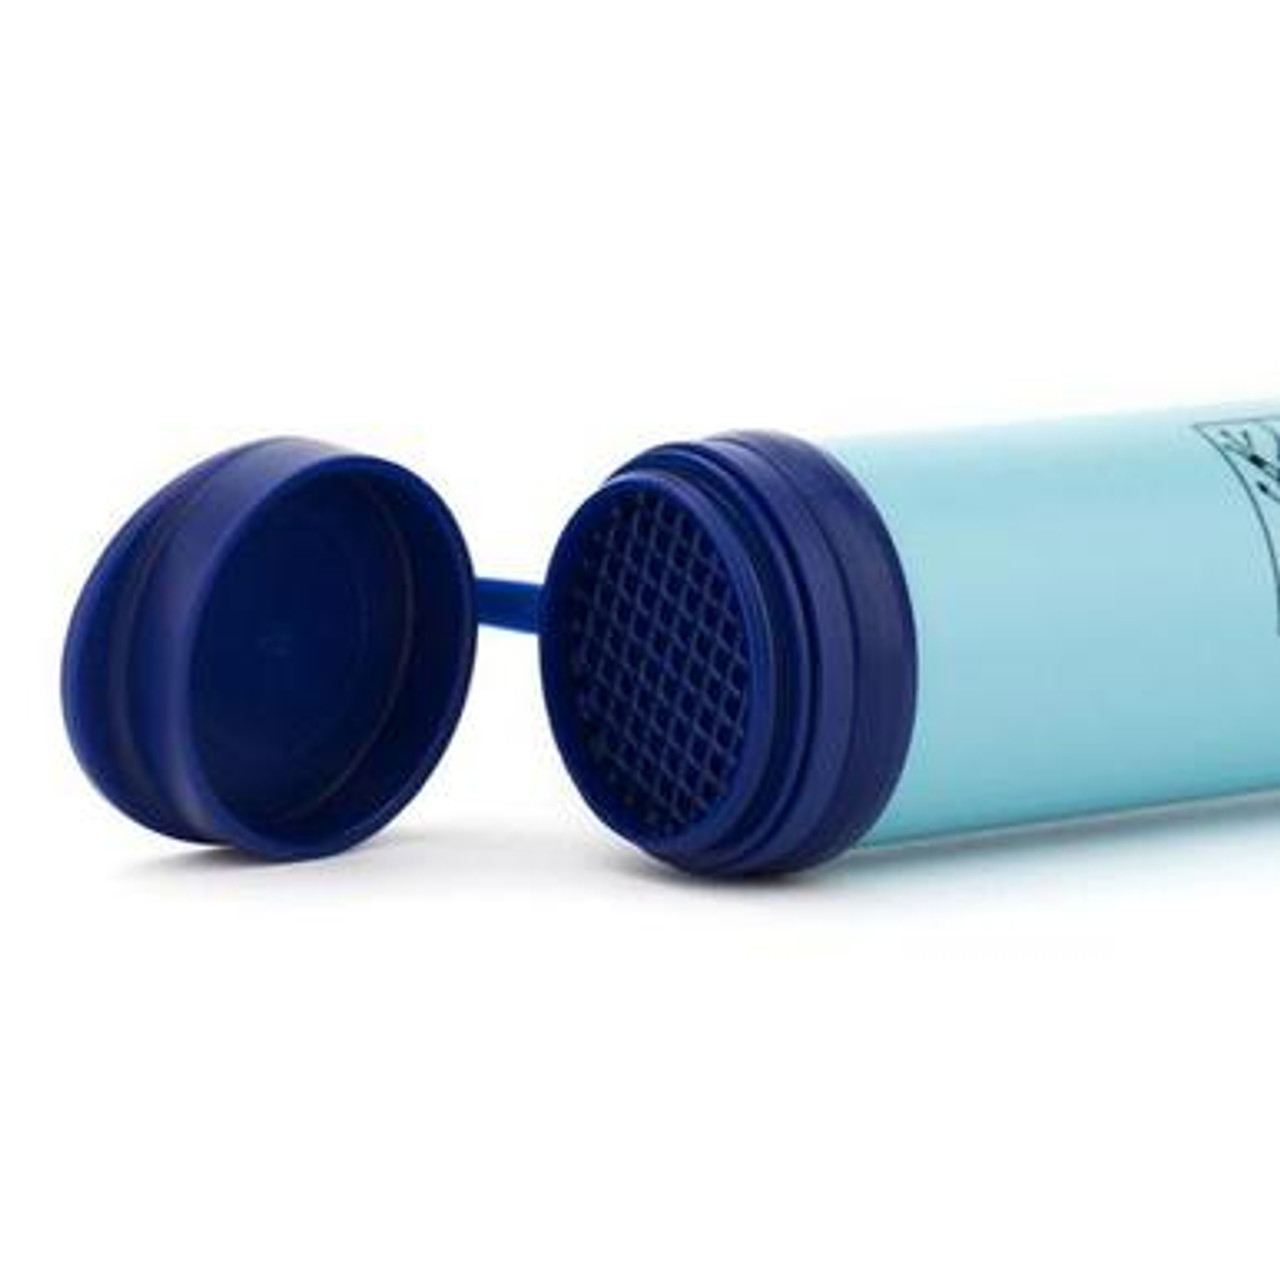 LifeStraw Personal Water Filter - 3 Pack